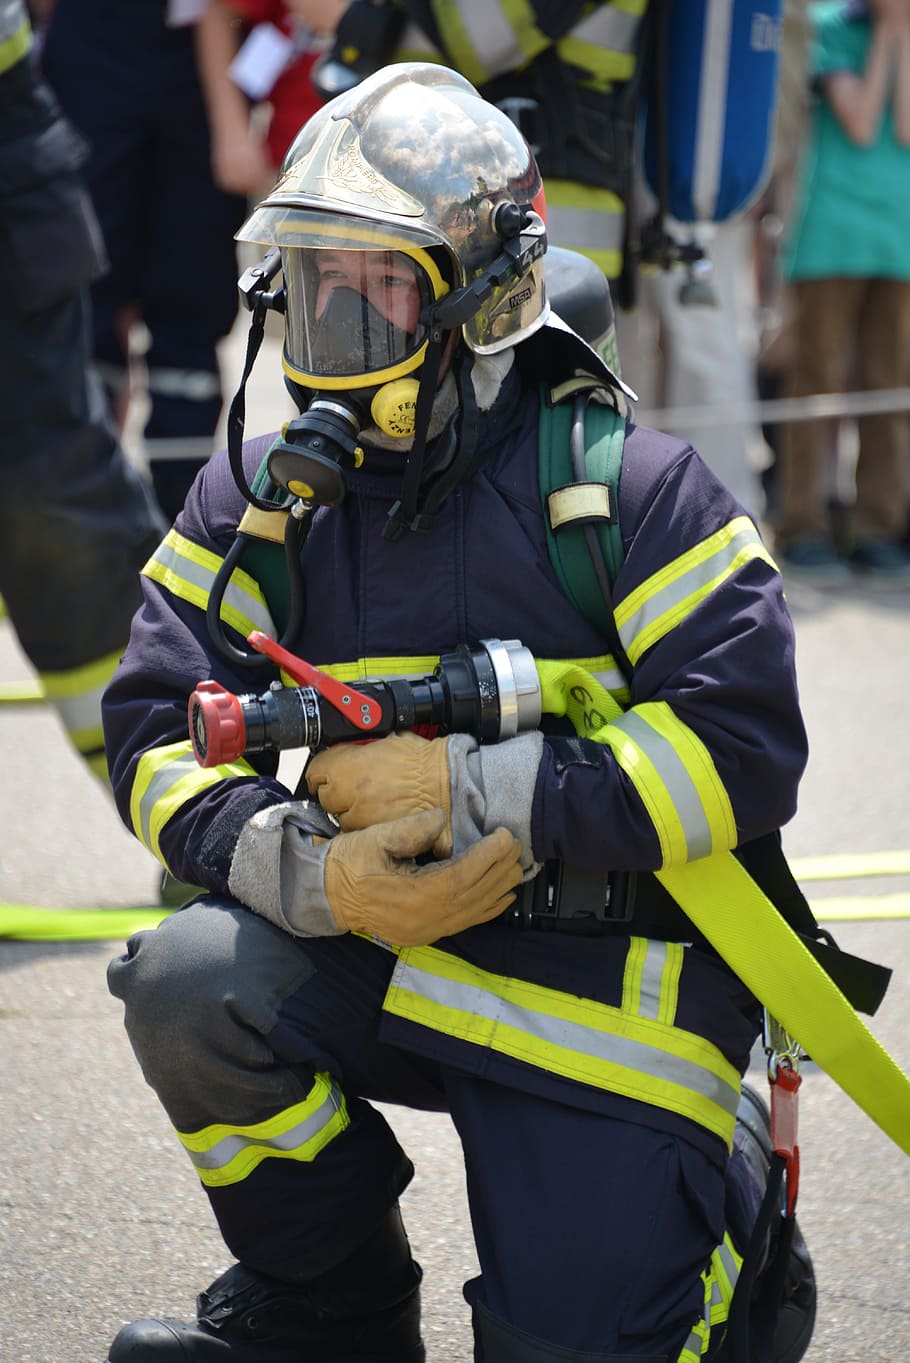 man, holding, fire hose, fire fighter, fire, wear protective clothing, respiratory protection, feuerloeschuebung, firefighters, delete